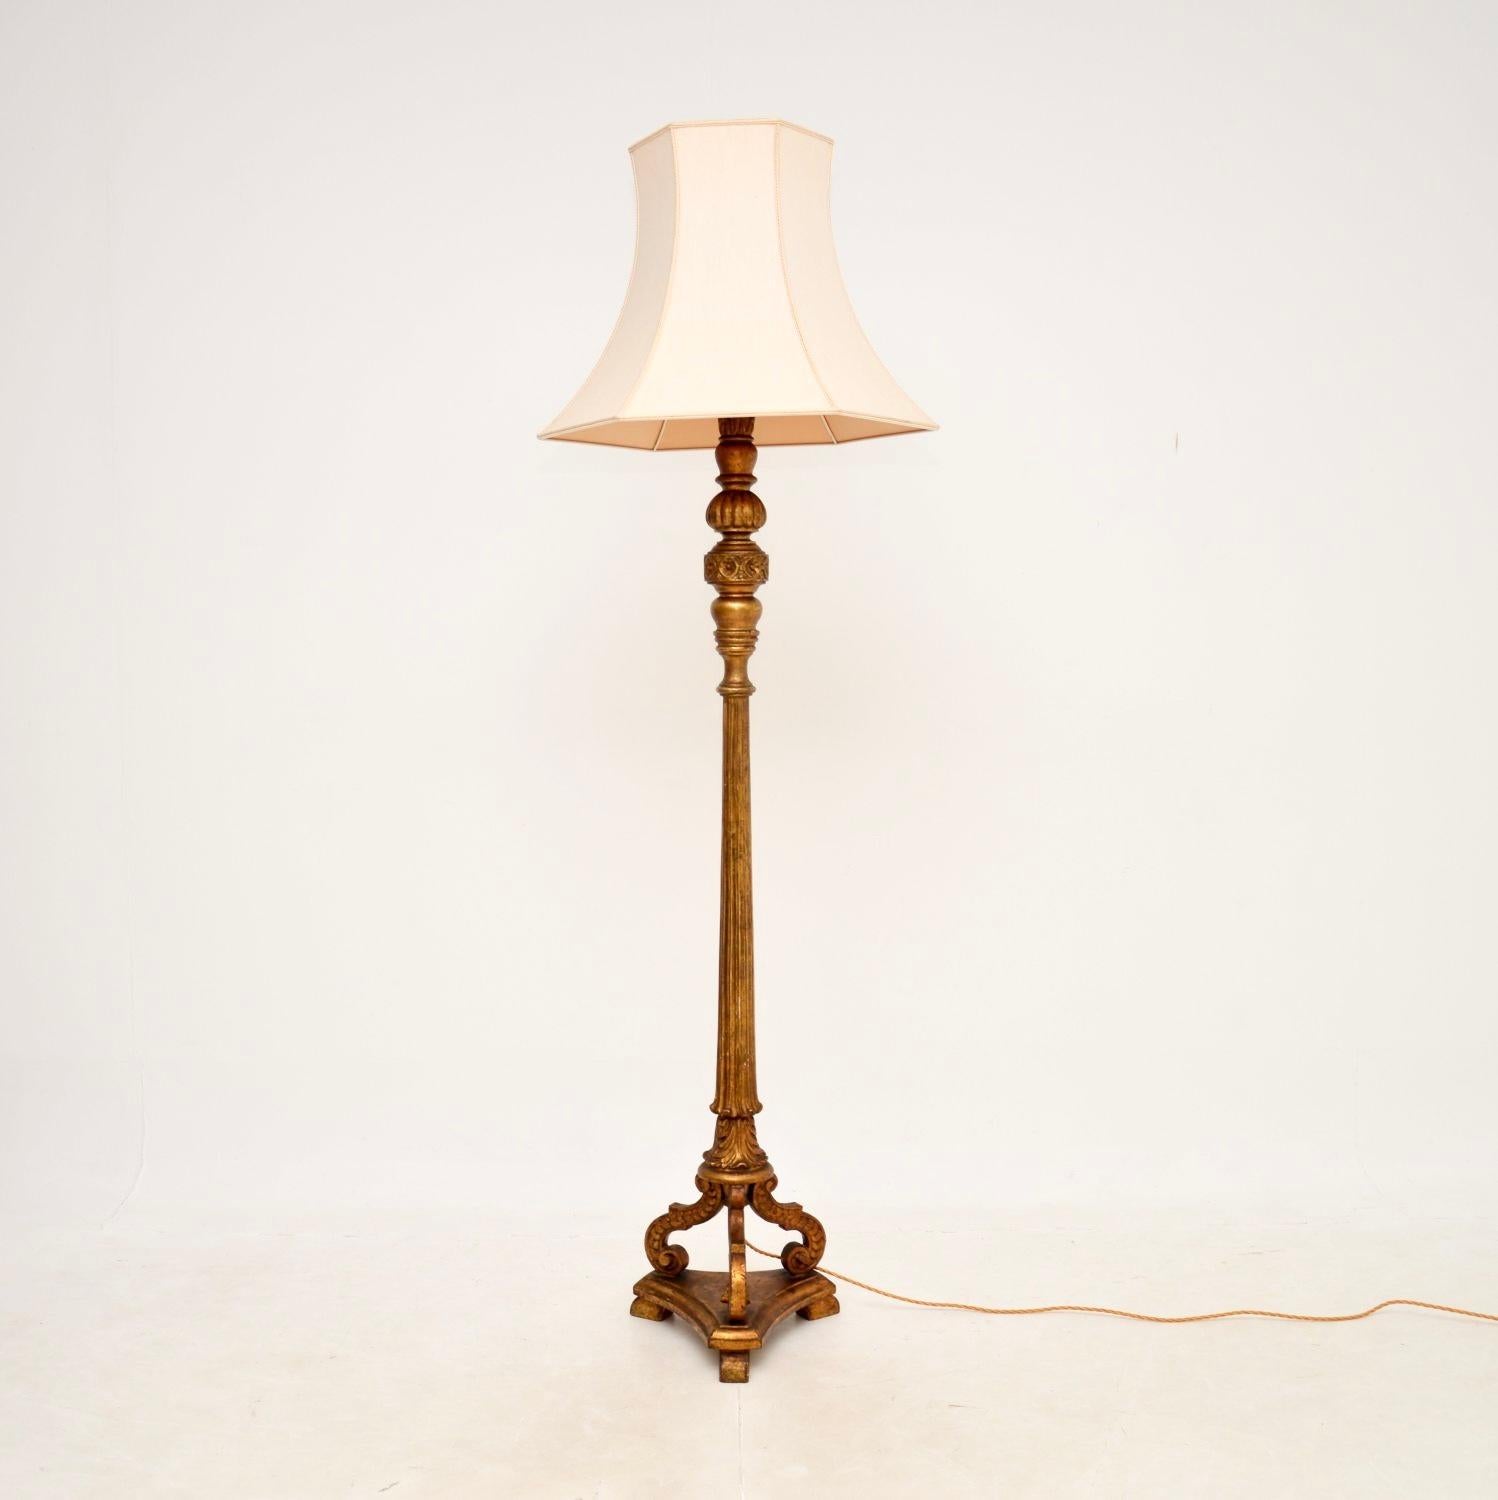 An absolutely stunning antique Victorian gilt wood floor lamp. This was made in England, it dates from around the 1890-1900 period.

It is of superb quality with fine and intricate details. The solid wood frame has a gorgeous gilded finish which has